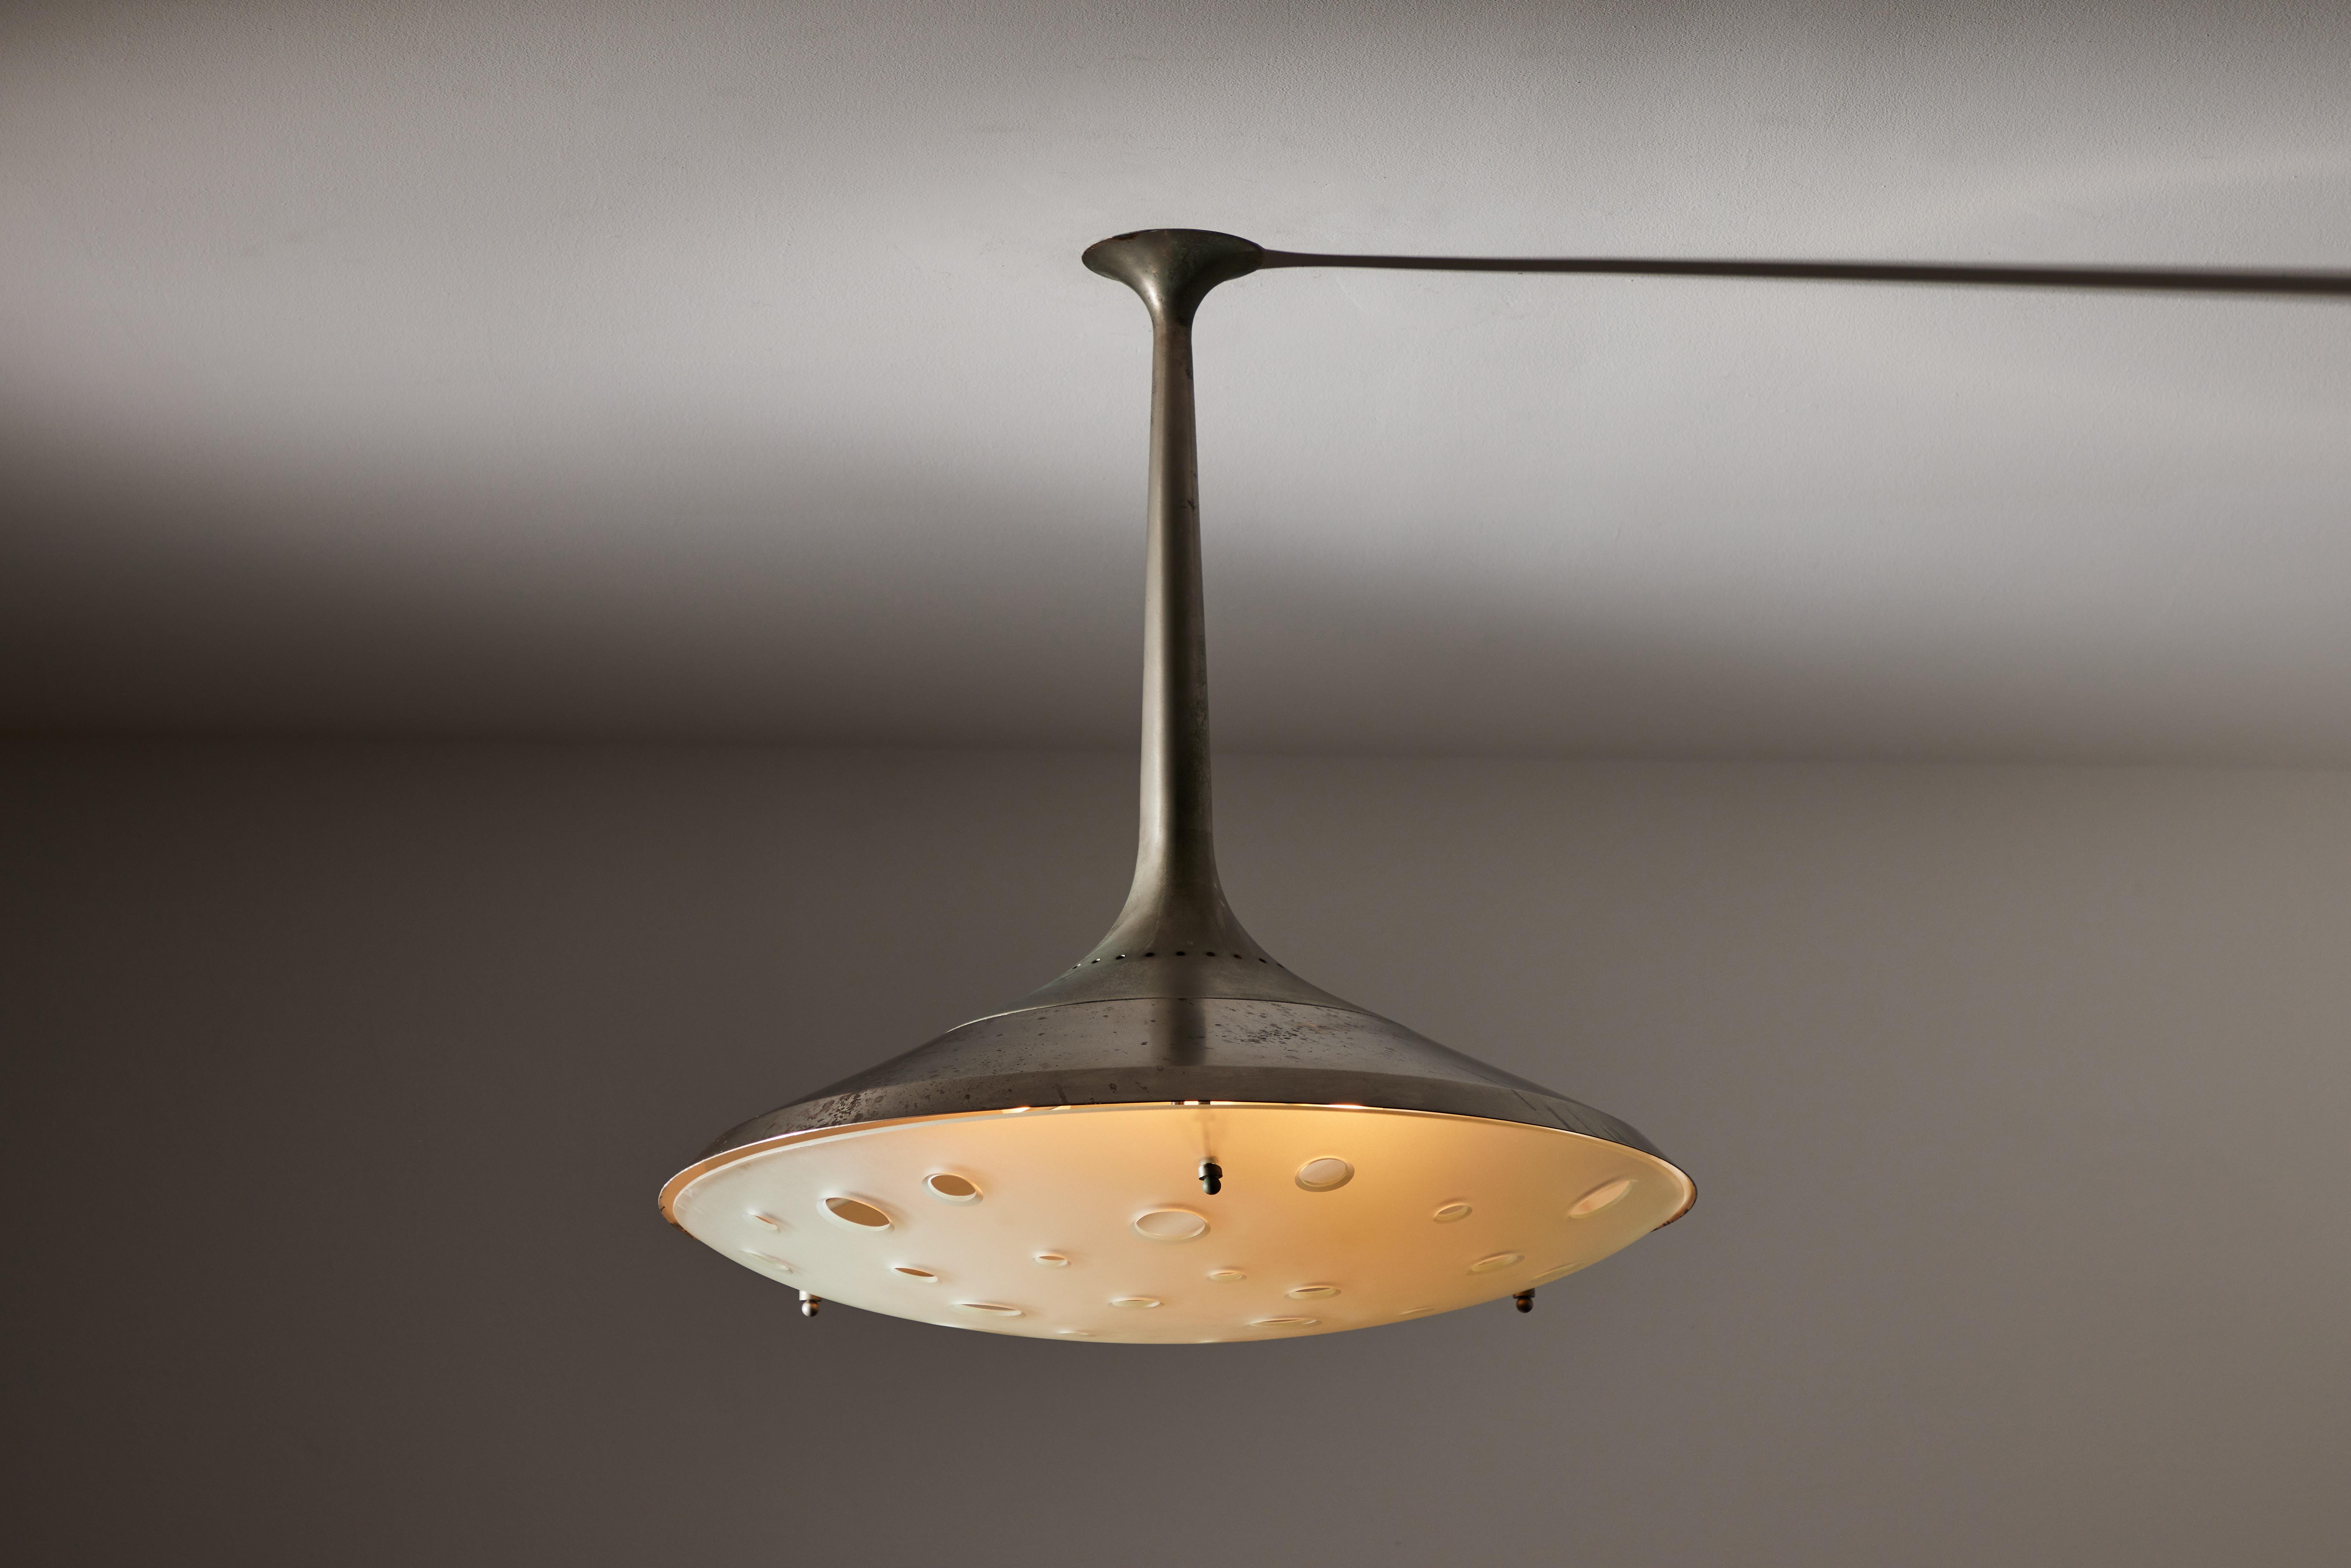 Model 2054 ceiling light by Max Ingrand for Fontana Arte. Designed and manufactured in Italy, 1956. Nickel-plated brass, curved, satin and ground crystal. Rewired for U.S. standards. We recommend six E27 25w maximum bulbs. Bulbs provided as a one